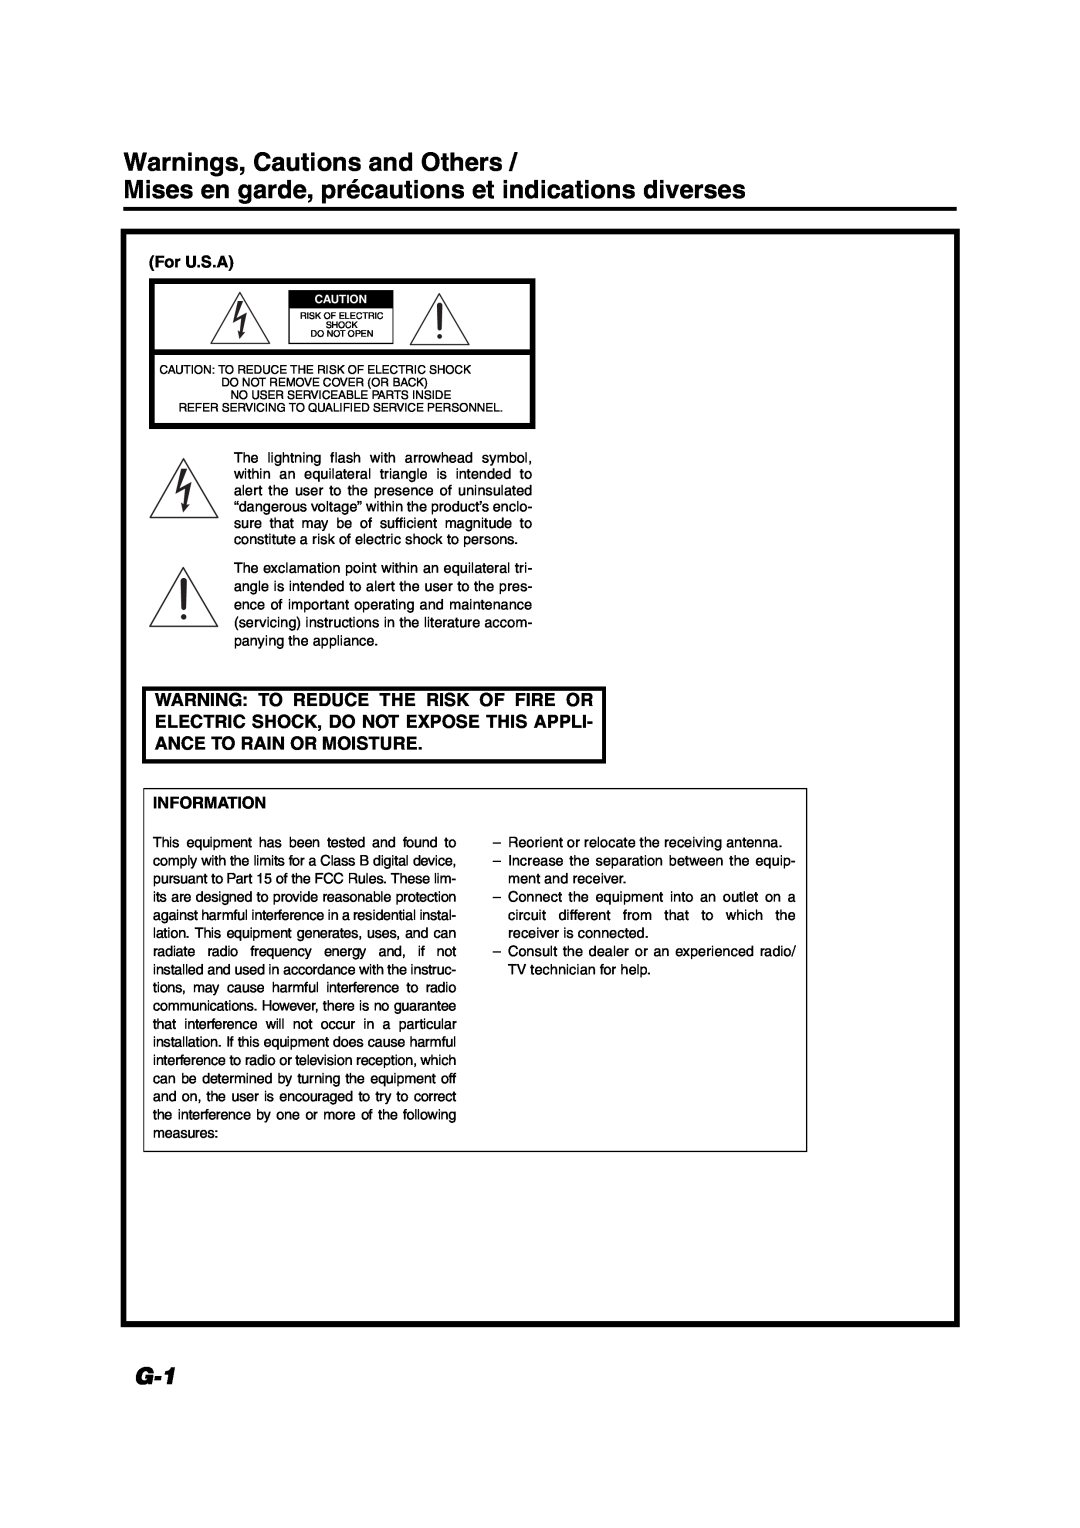 JVC VS-DT6/VS-DT8 manual Warnings, Cautions and Others, For U.S.A, Information 